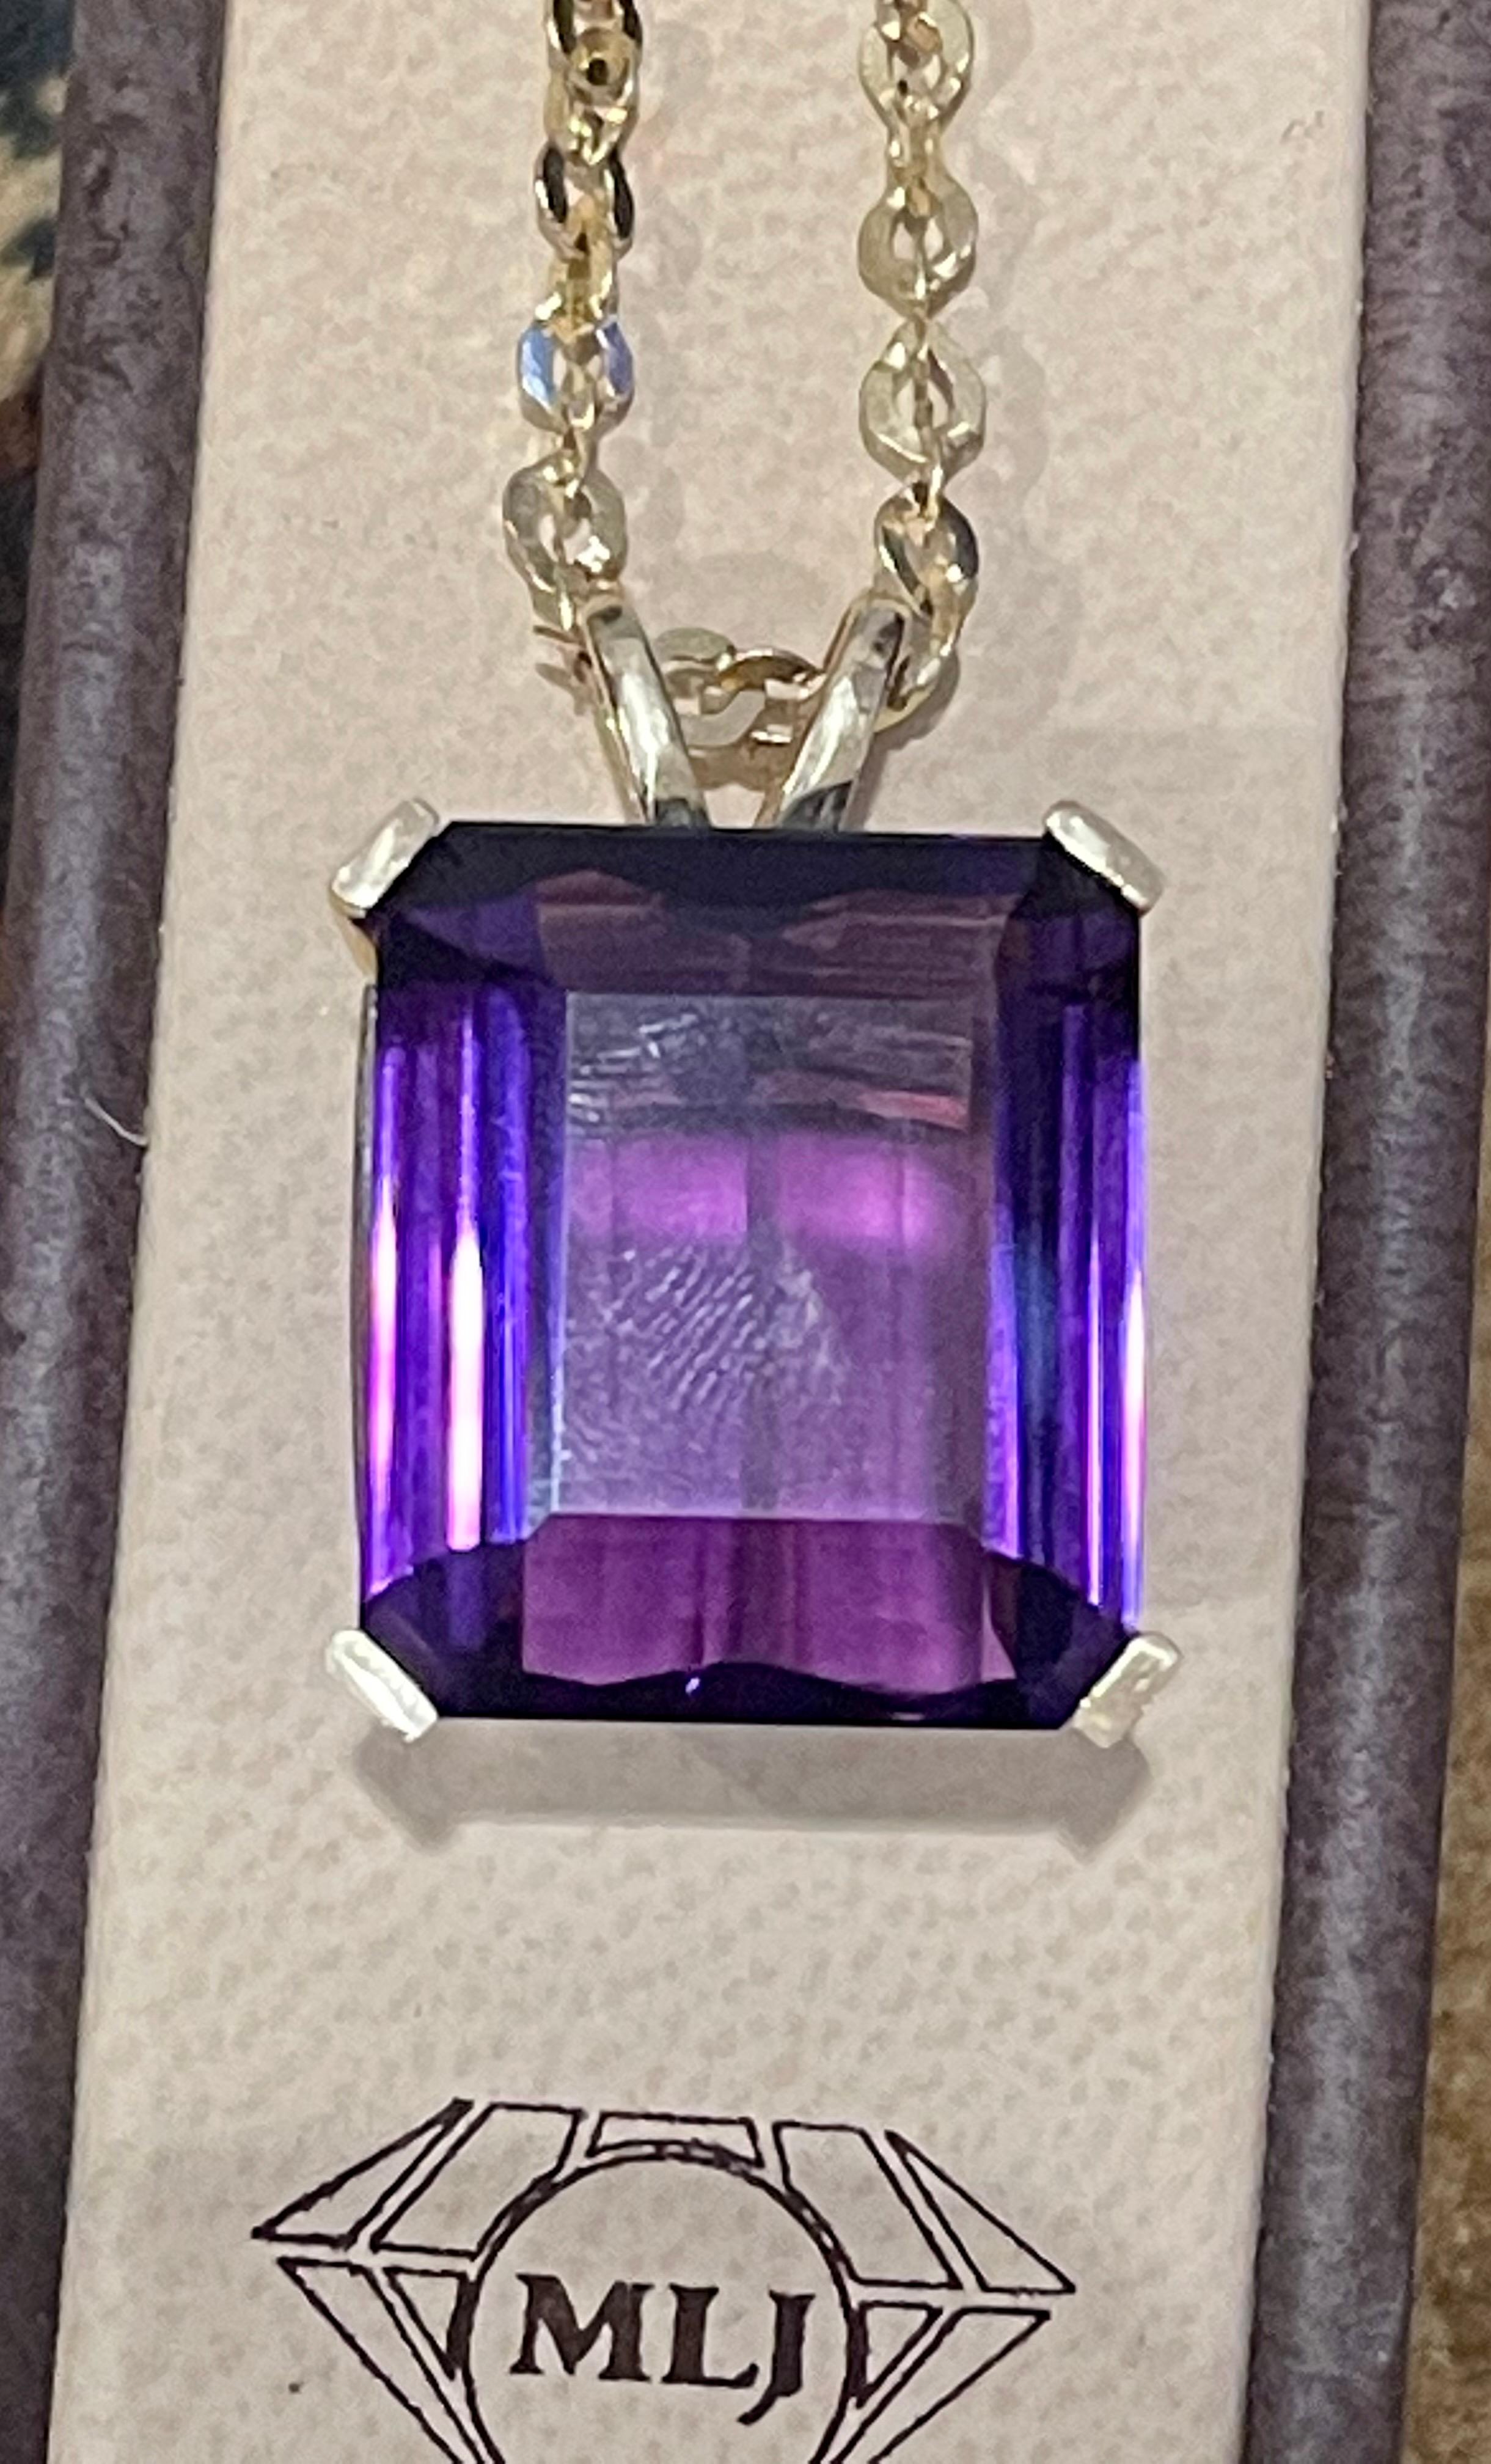 42 Ct Emerald Cut Amethyst Pendant /Necklace + 14 Kt Yellow Gold Chain Vintage 7